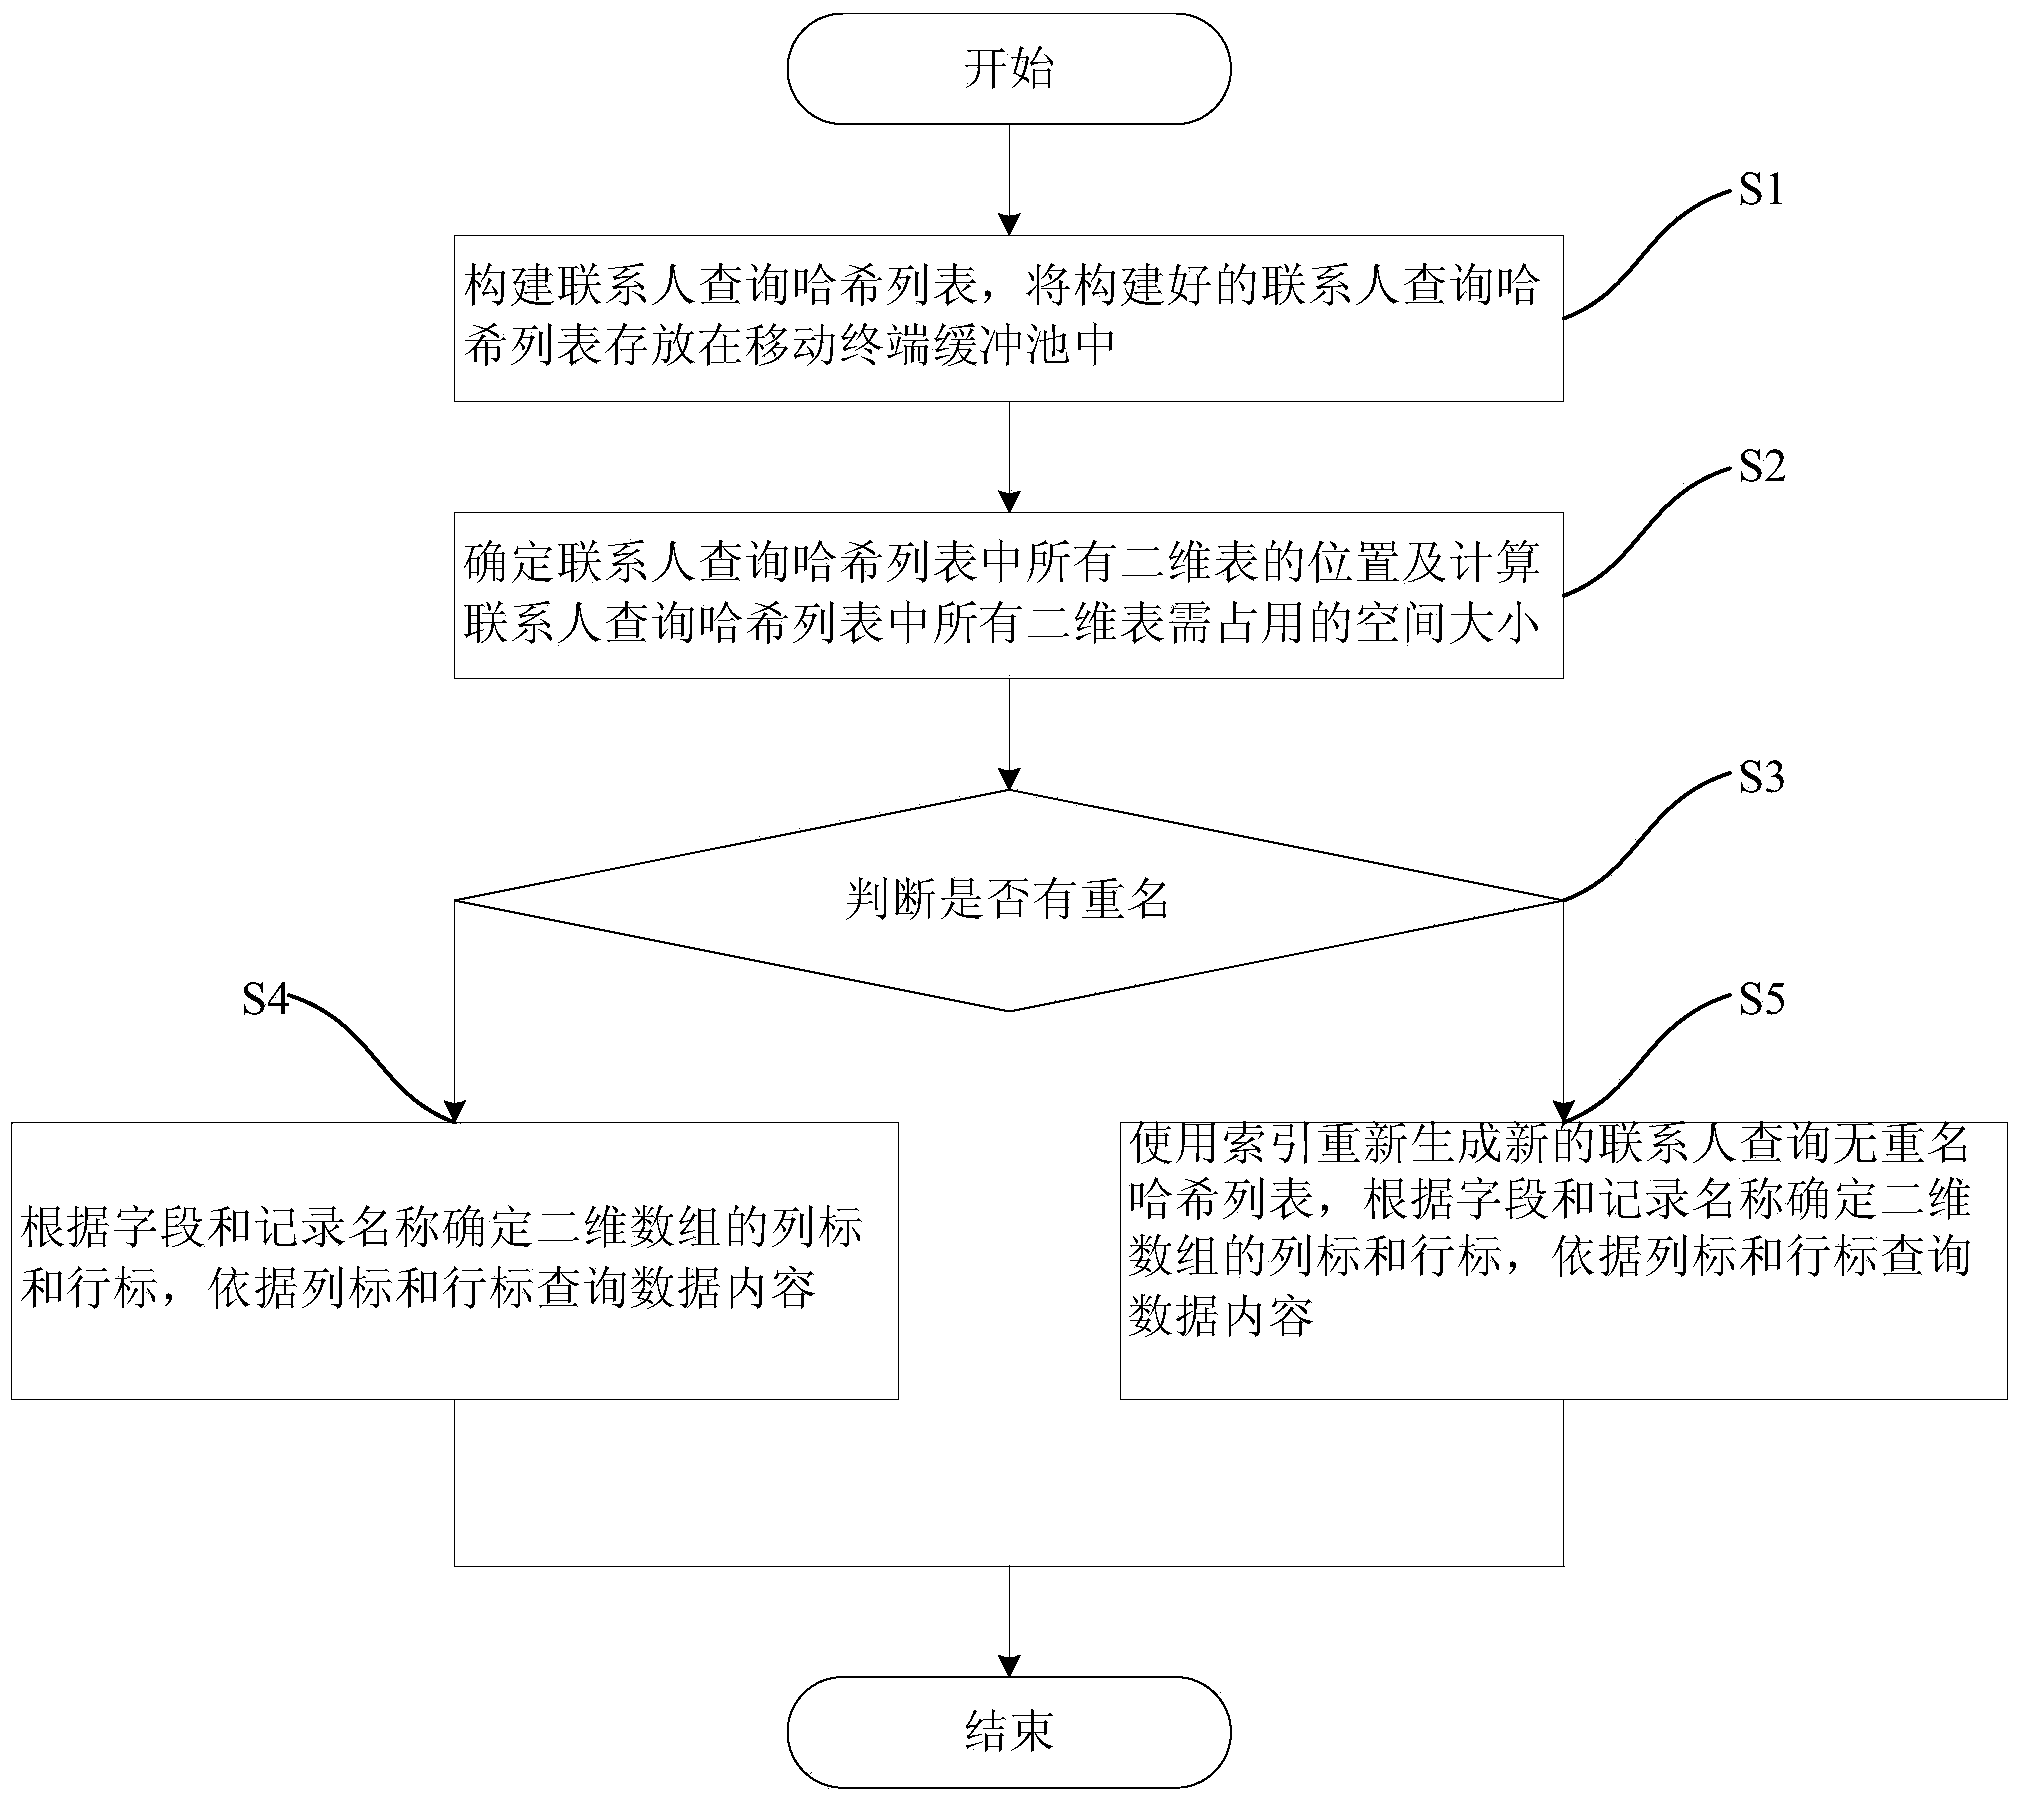 Two-dimensional dynamic contact inquiry list inquiring method and system based on double-hash structure